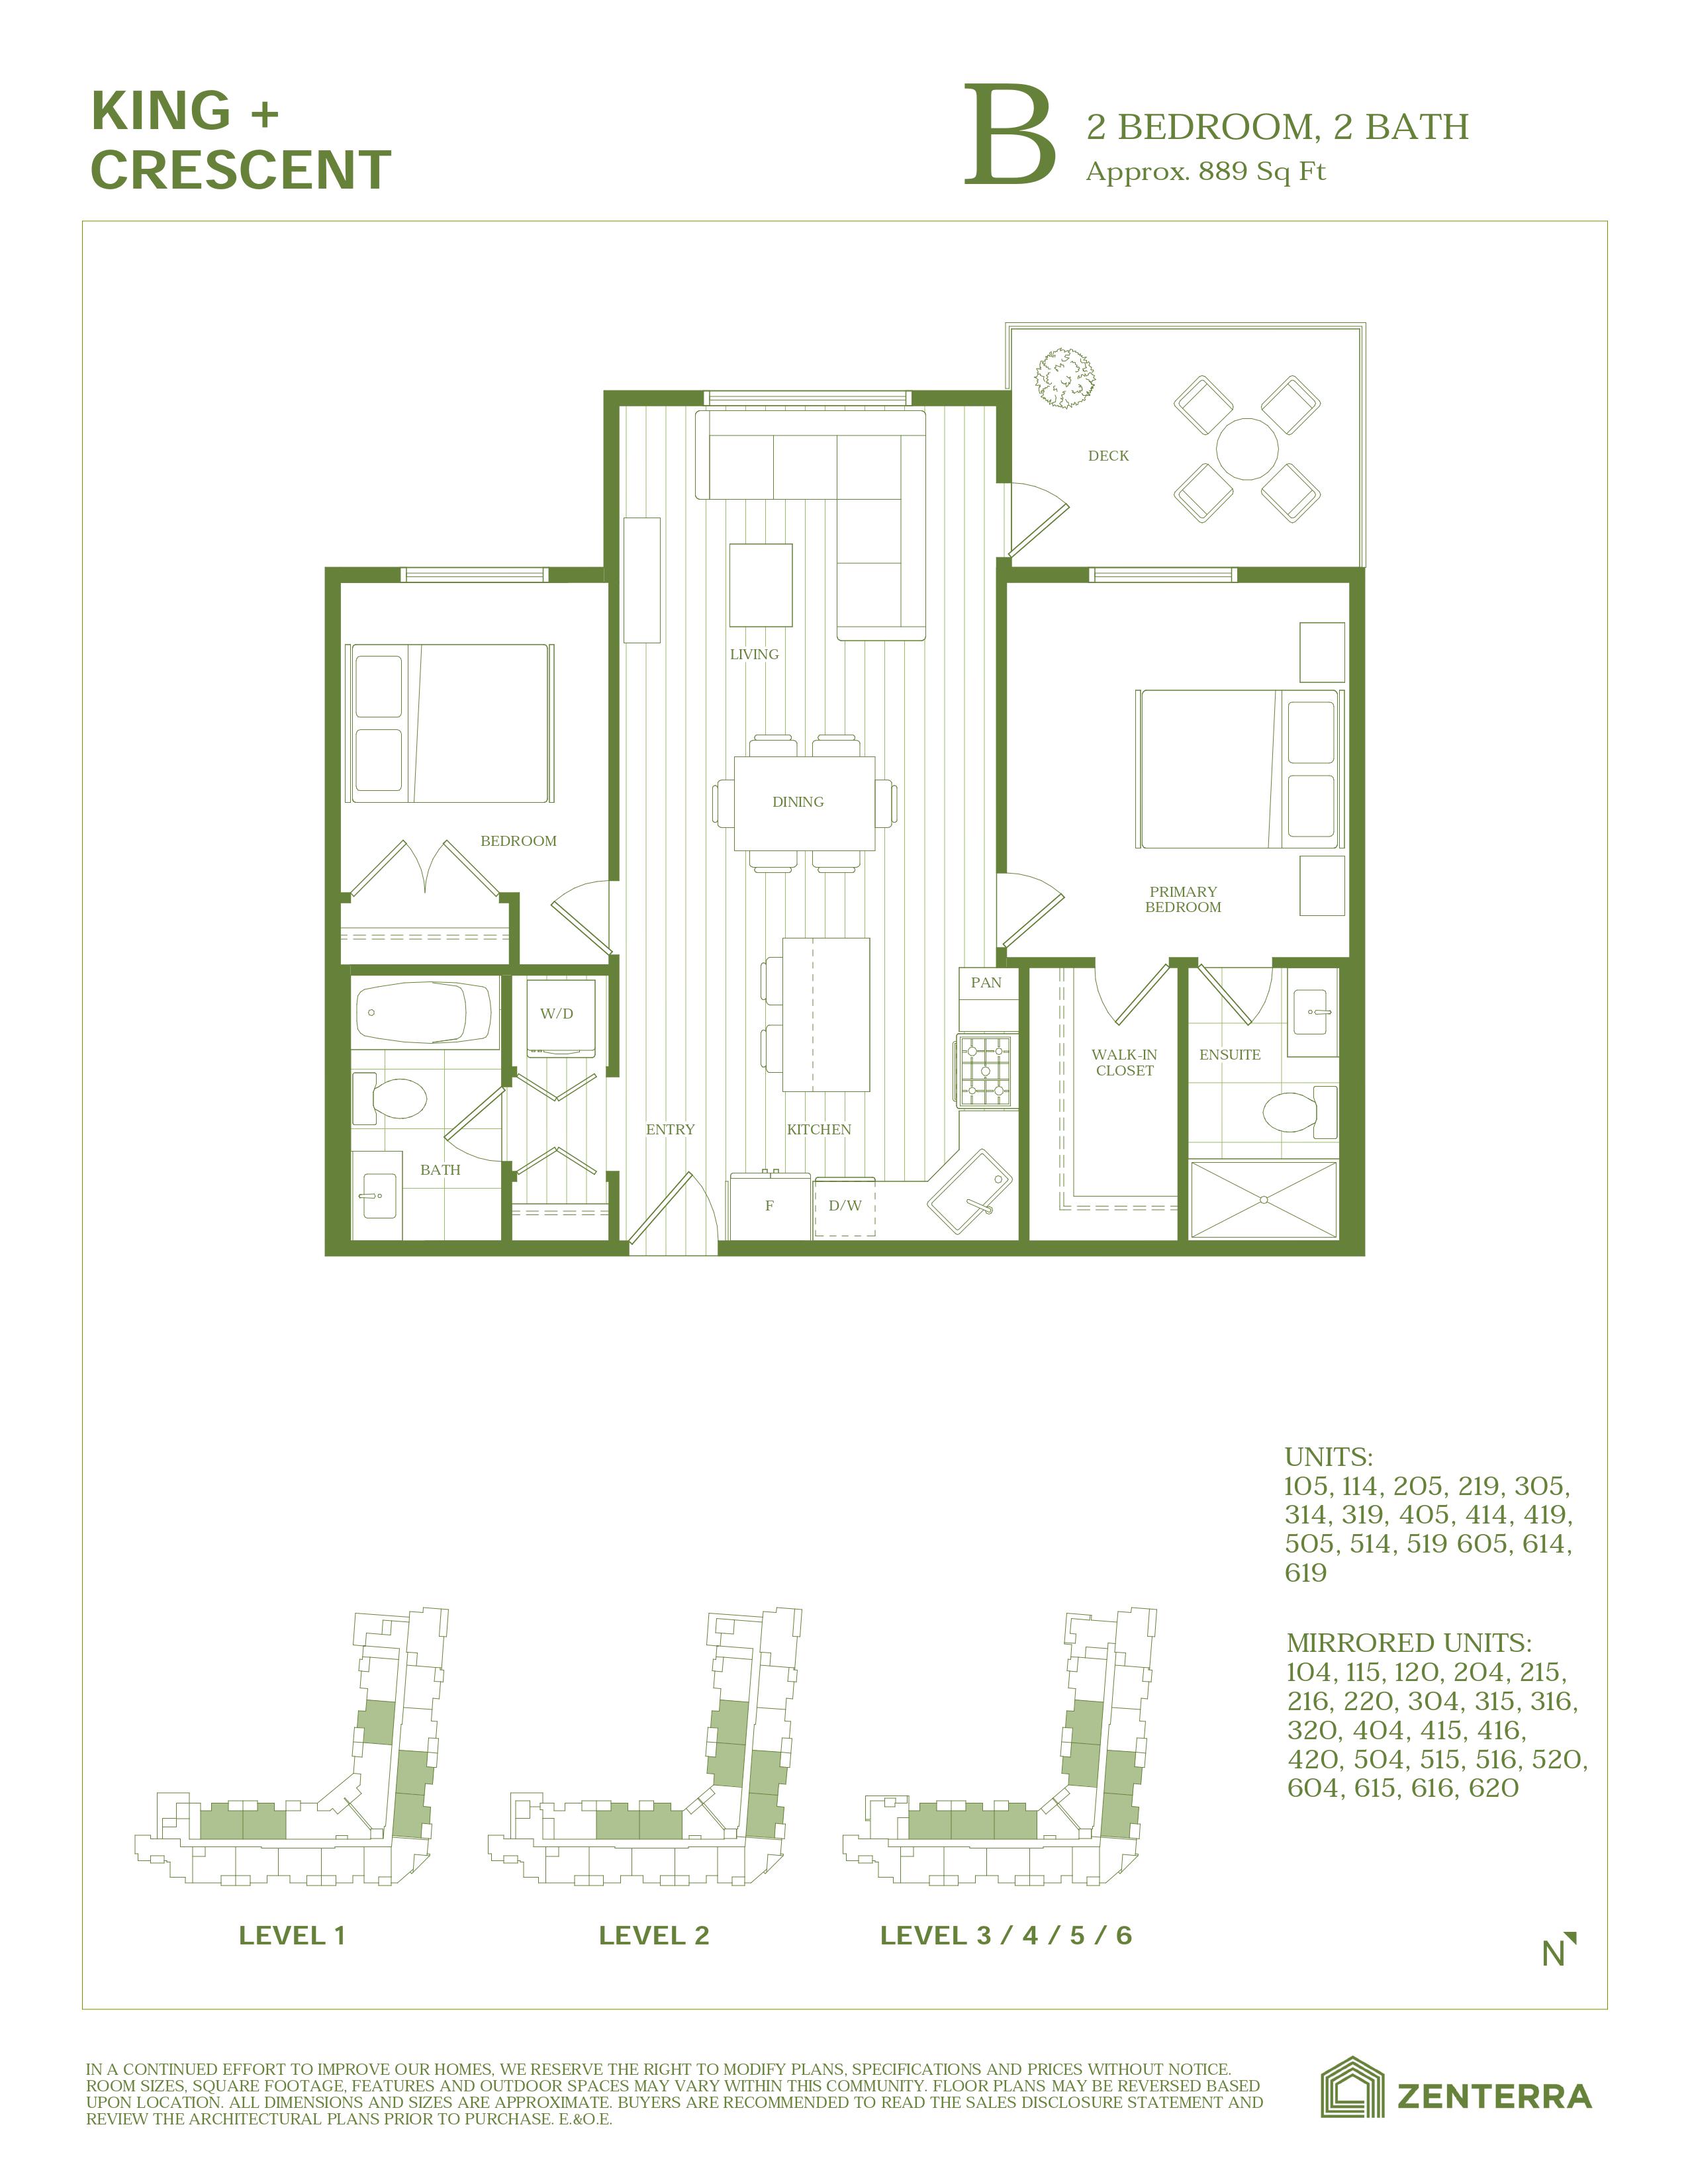 B Floor Plan of King + Crescent Condos with undefined beds